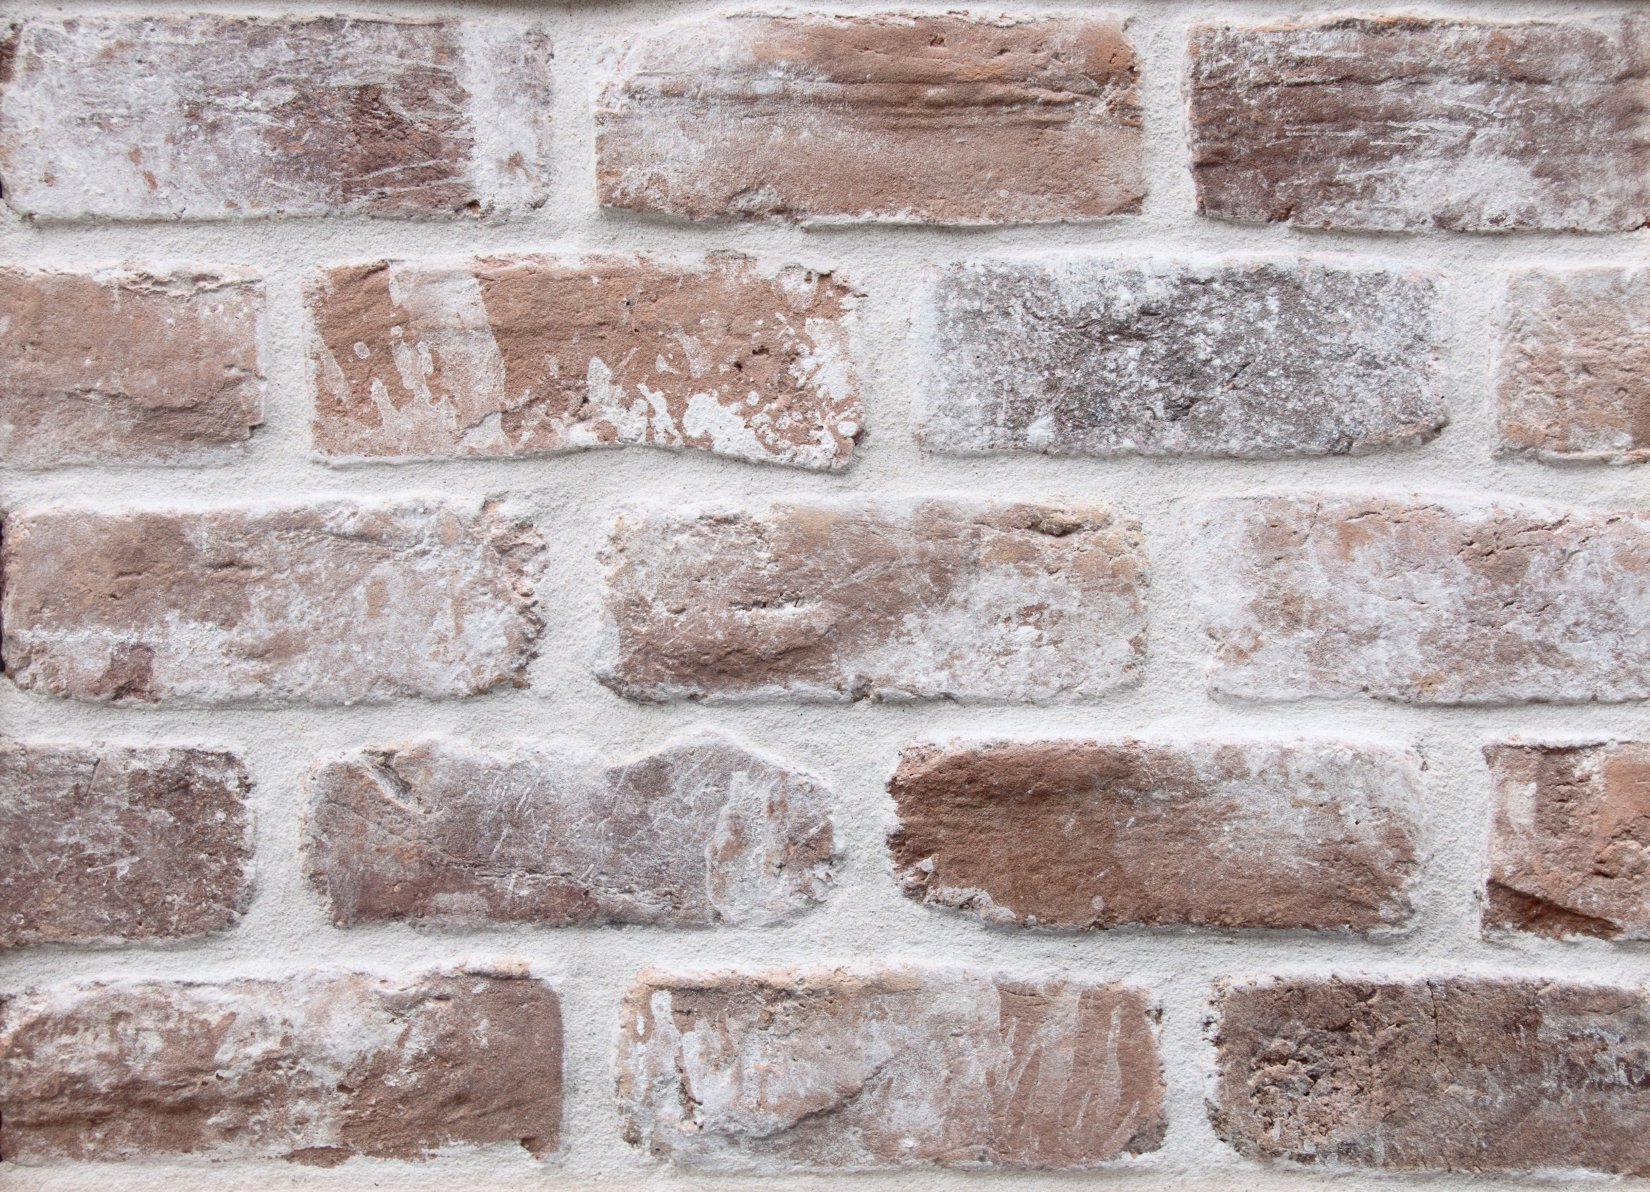 Brick Texture, Abstract, Stability, Solid, Row, HQ Photo